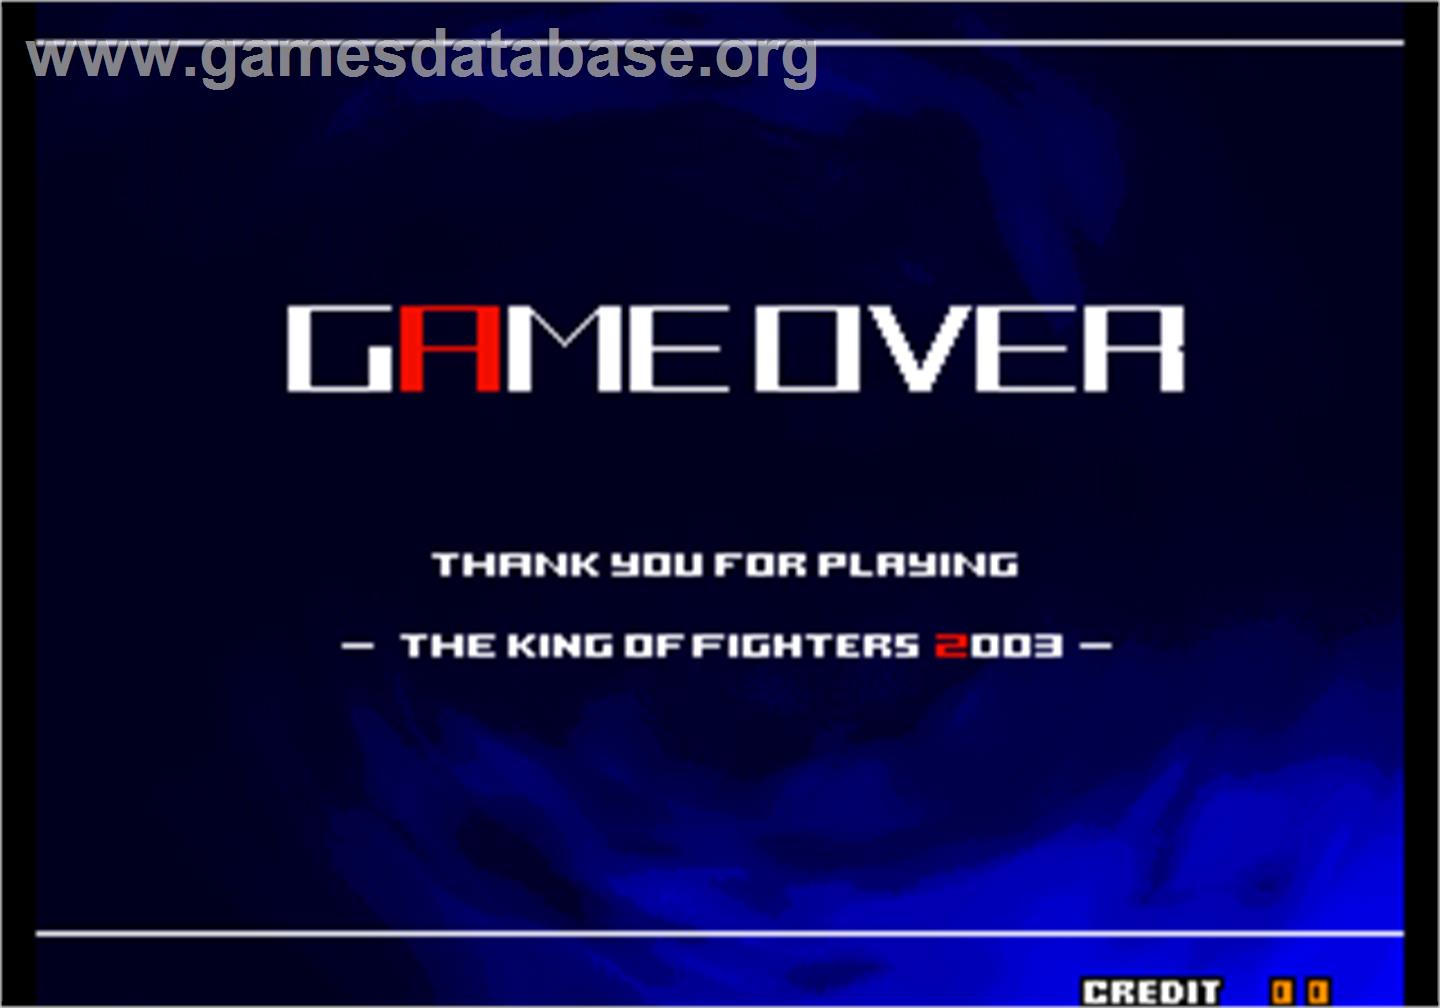 The King of Fighters 2003 - Arcade - Artwork - Game Over Screen